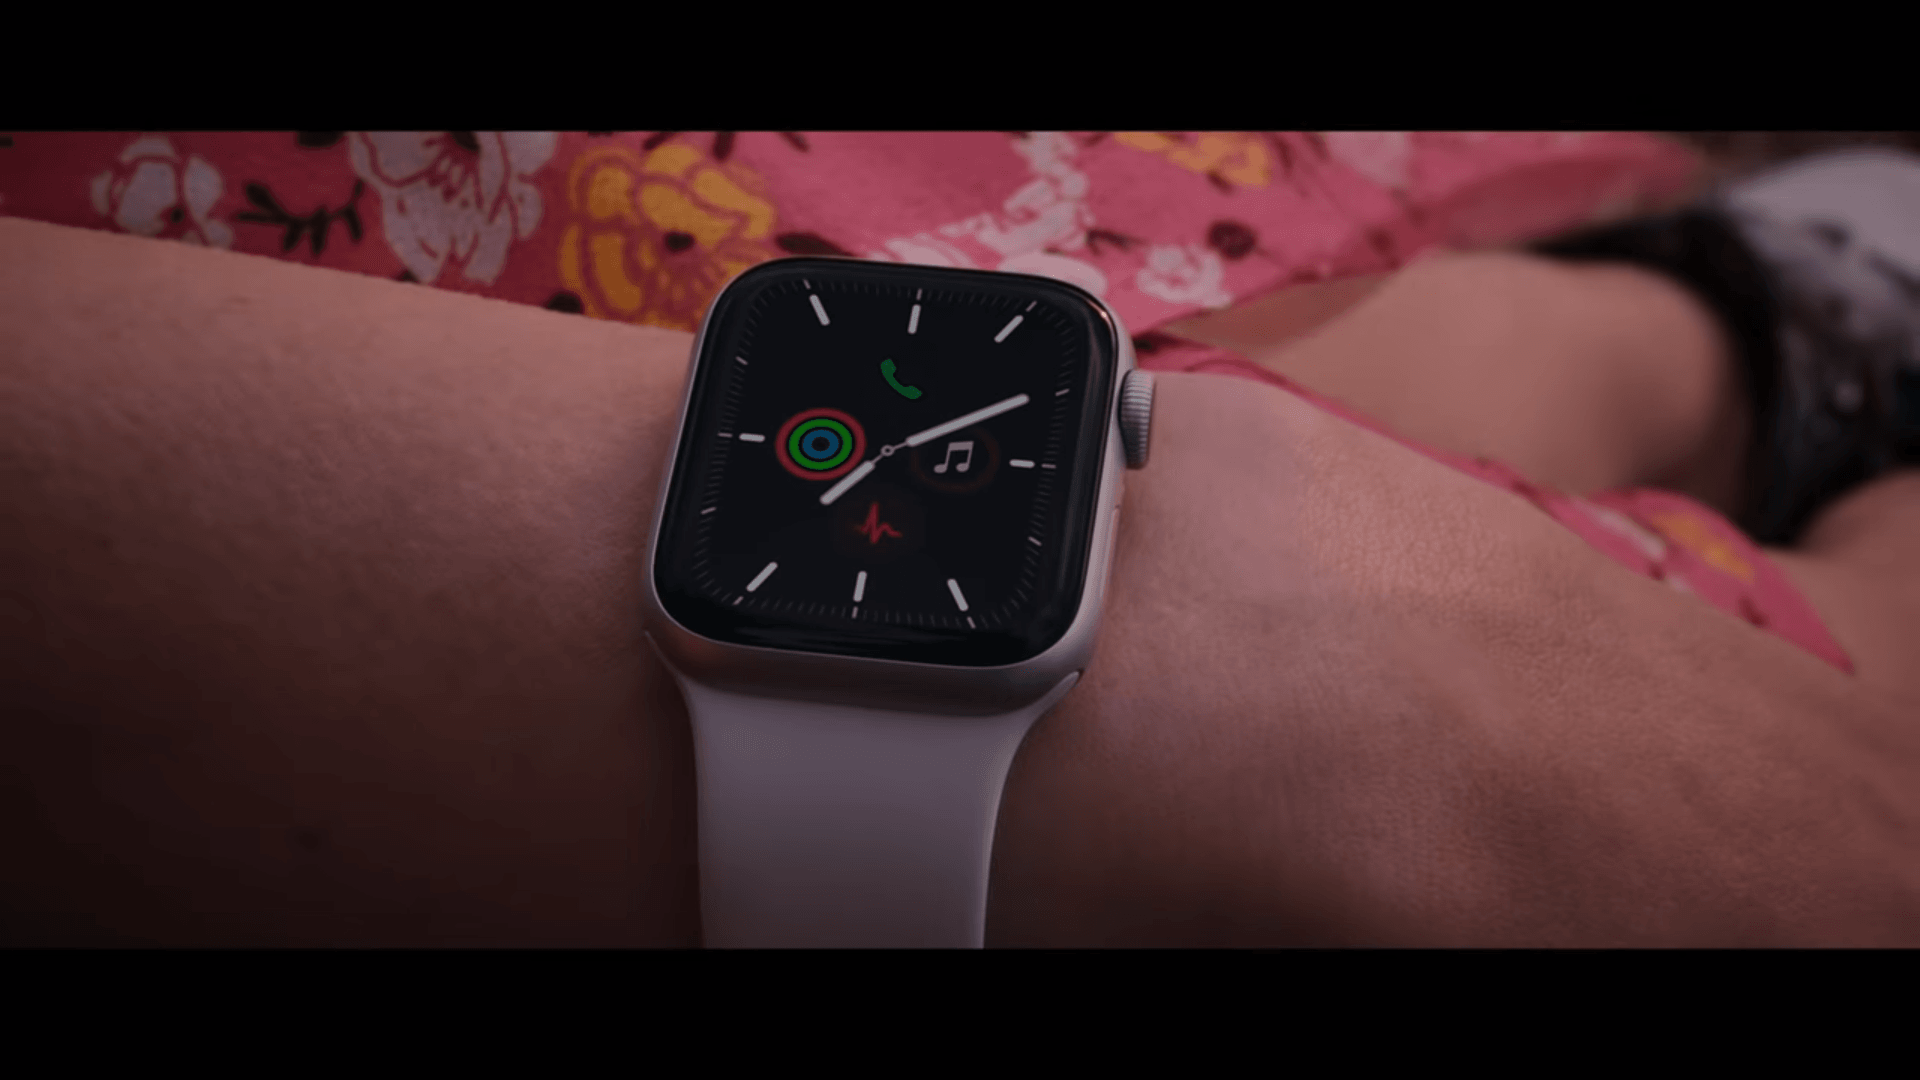 Apple Watch Series 5 price release date